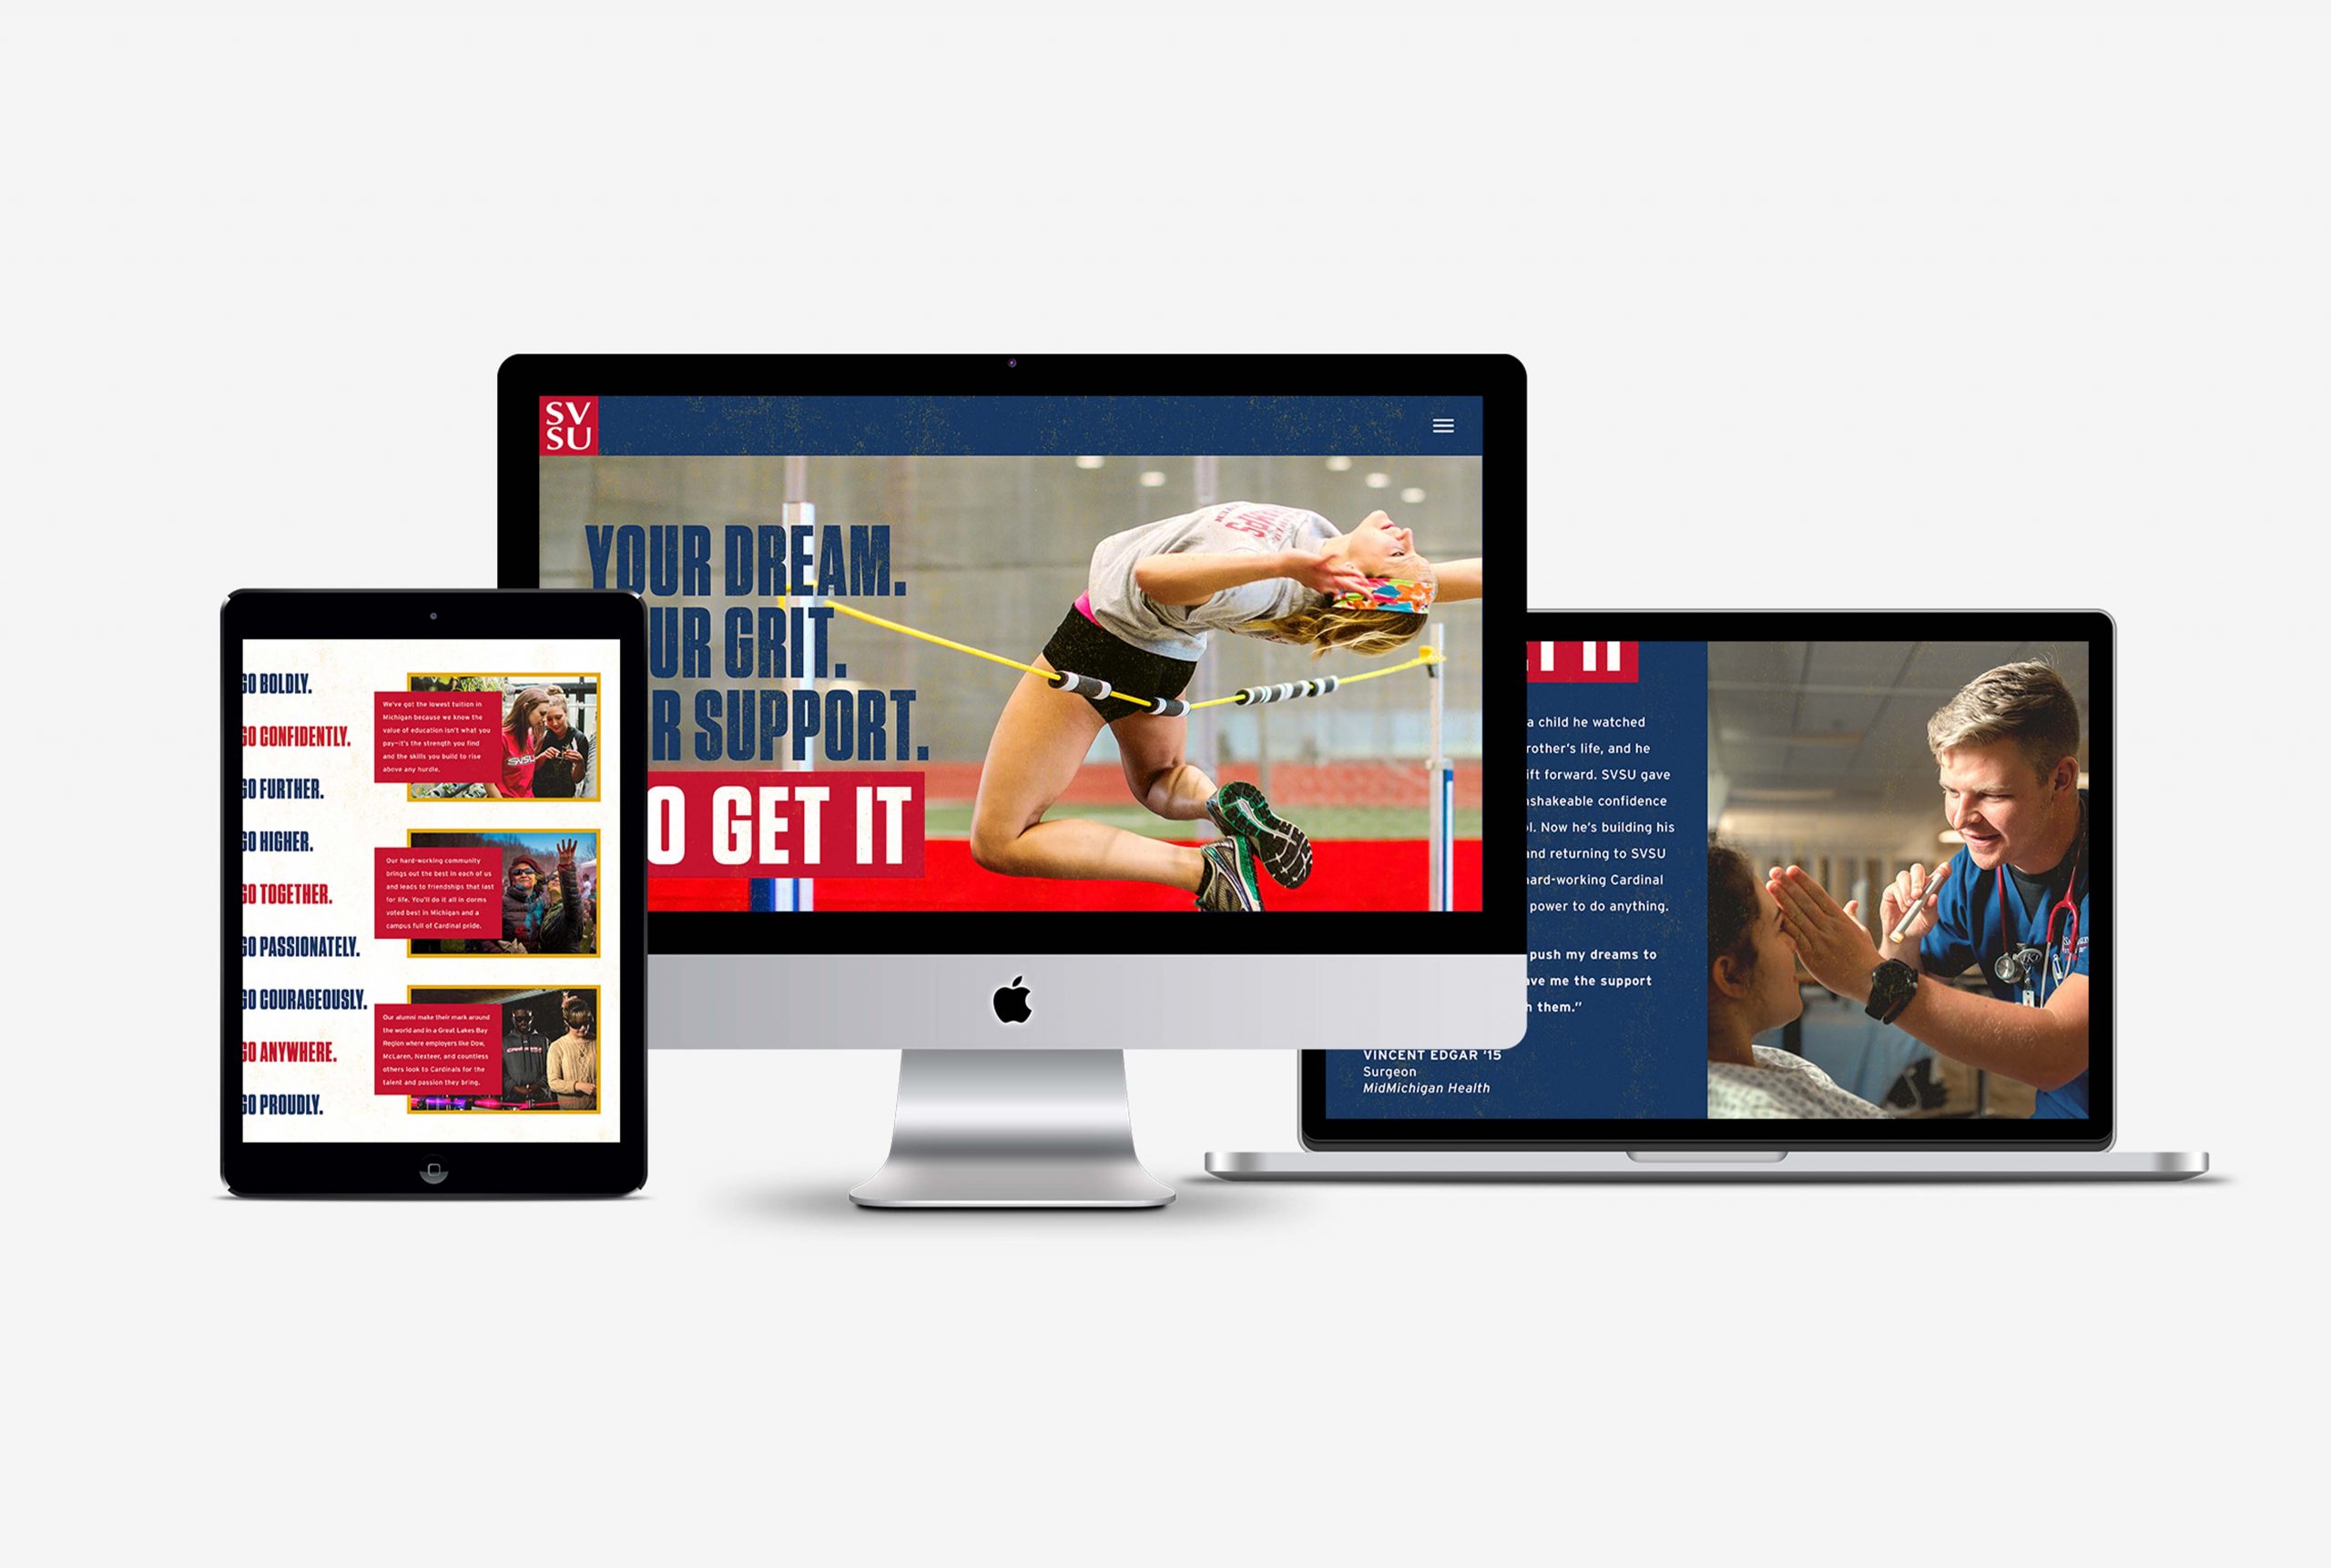 SVSU Website redesign shown on multiple devices